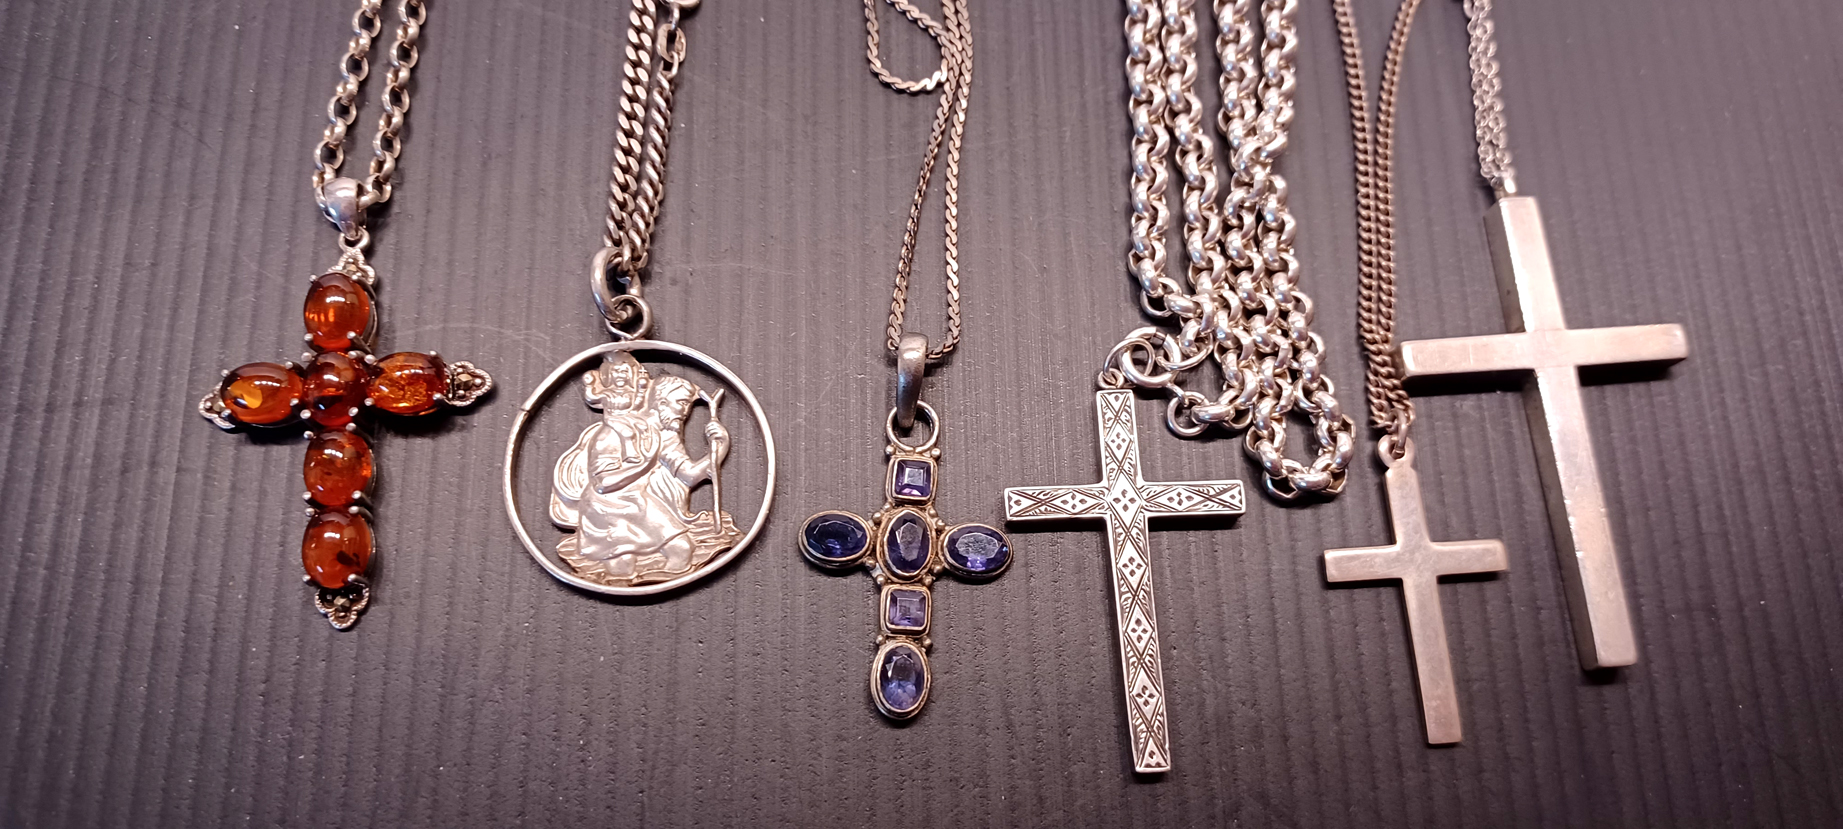 6 SILVER NECKLACE 139.5g, A ST CHRISTOPHER, 5 CRUCIFIXES, INC. AMBER, AMETHYST. LARGEST 60MM X 35MM  - Image 2 of 2